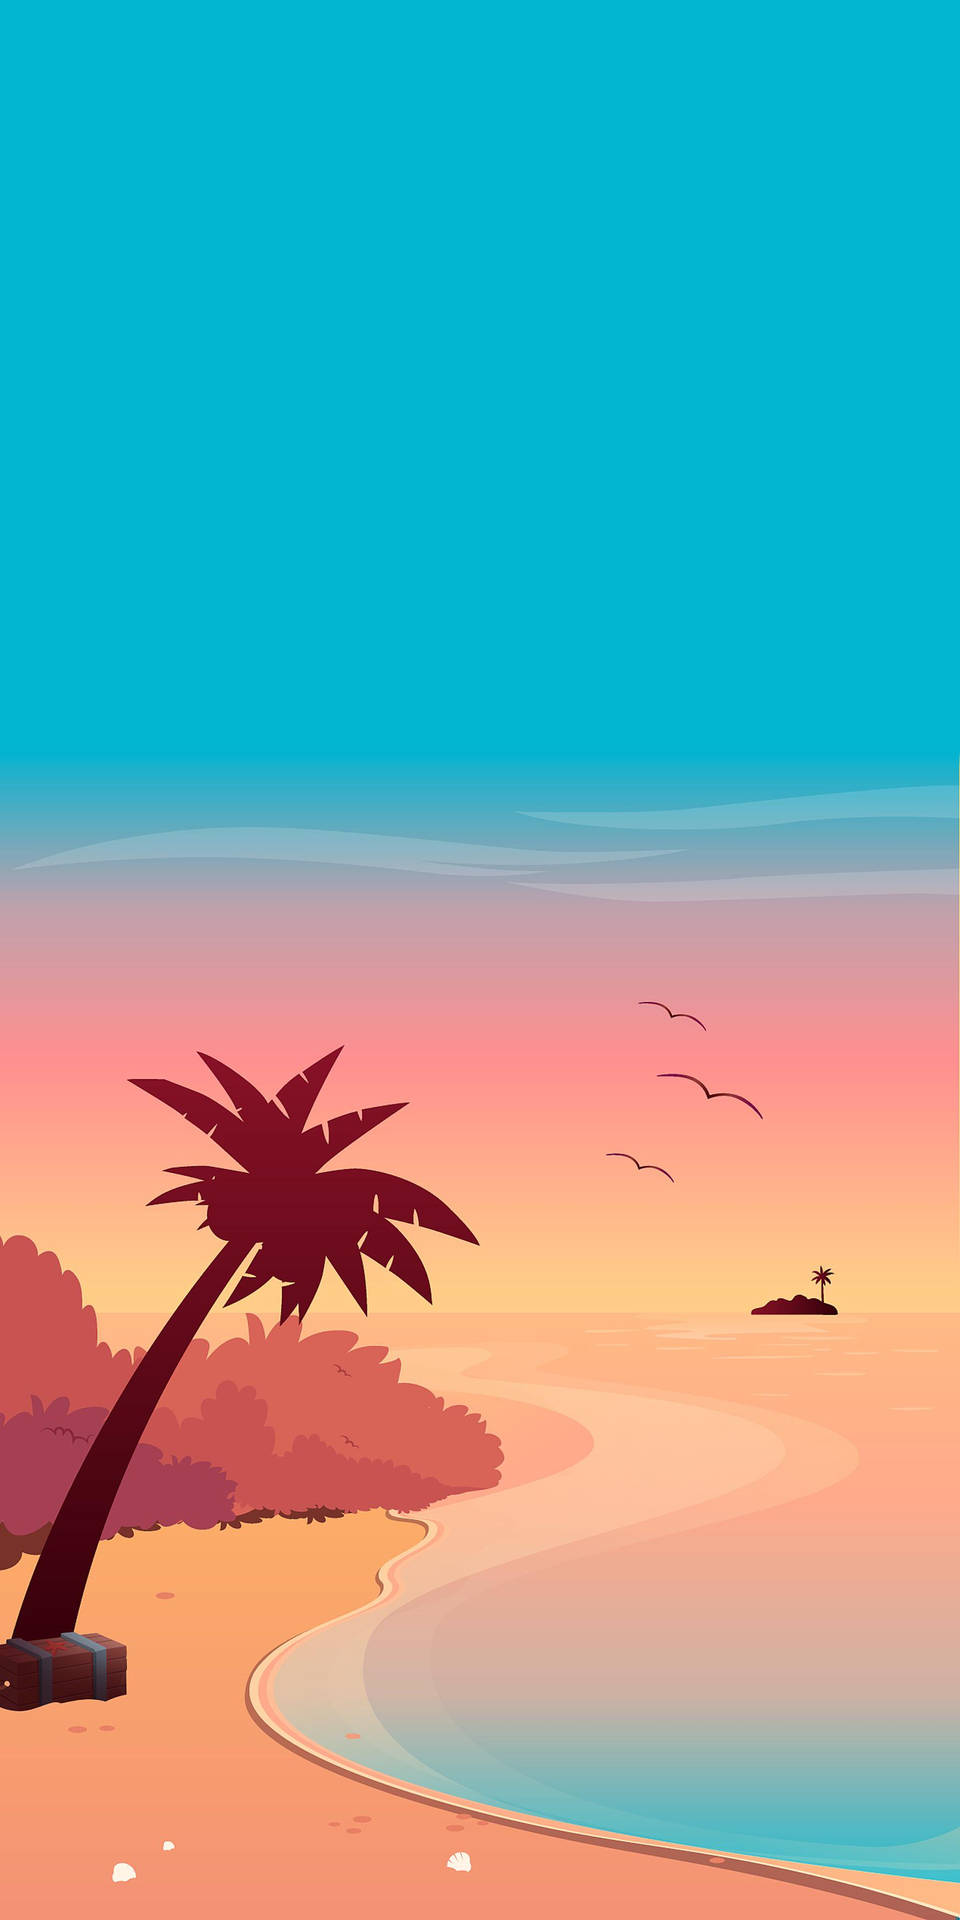 Afternoon Beach Vibes Background